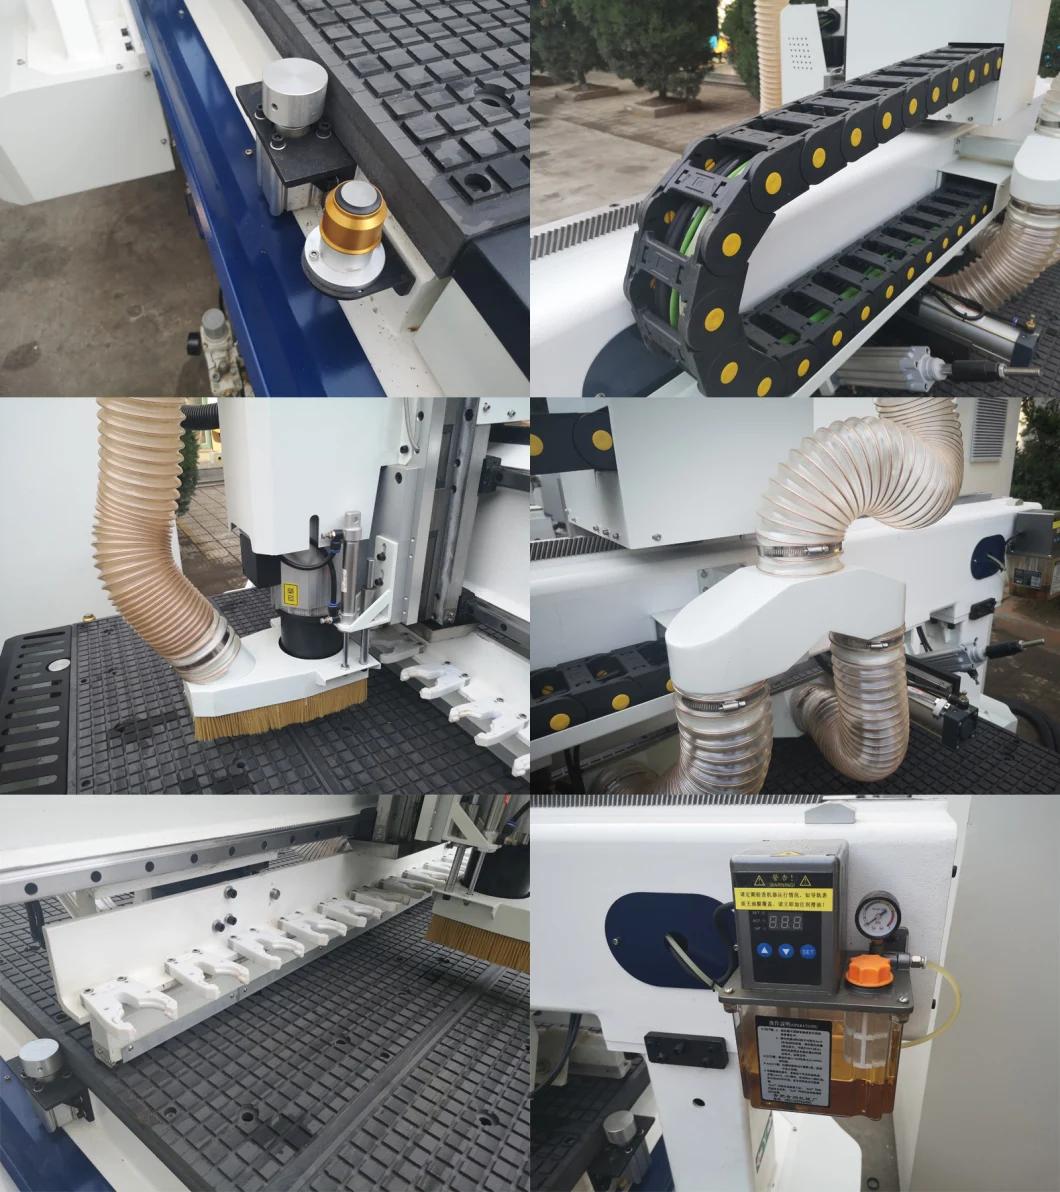 S100 Linear Type Tools Change Machining Center CNC Machinery